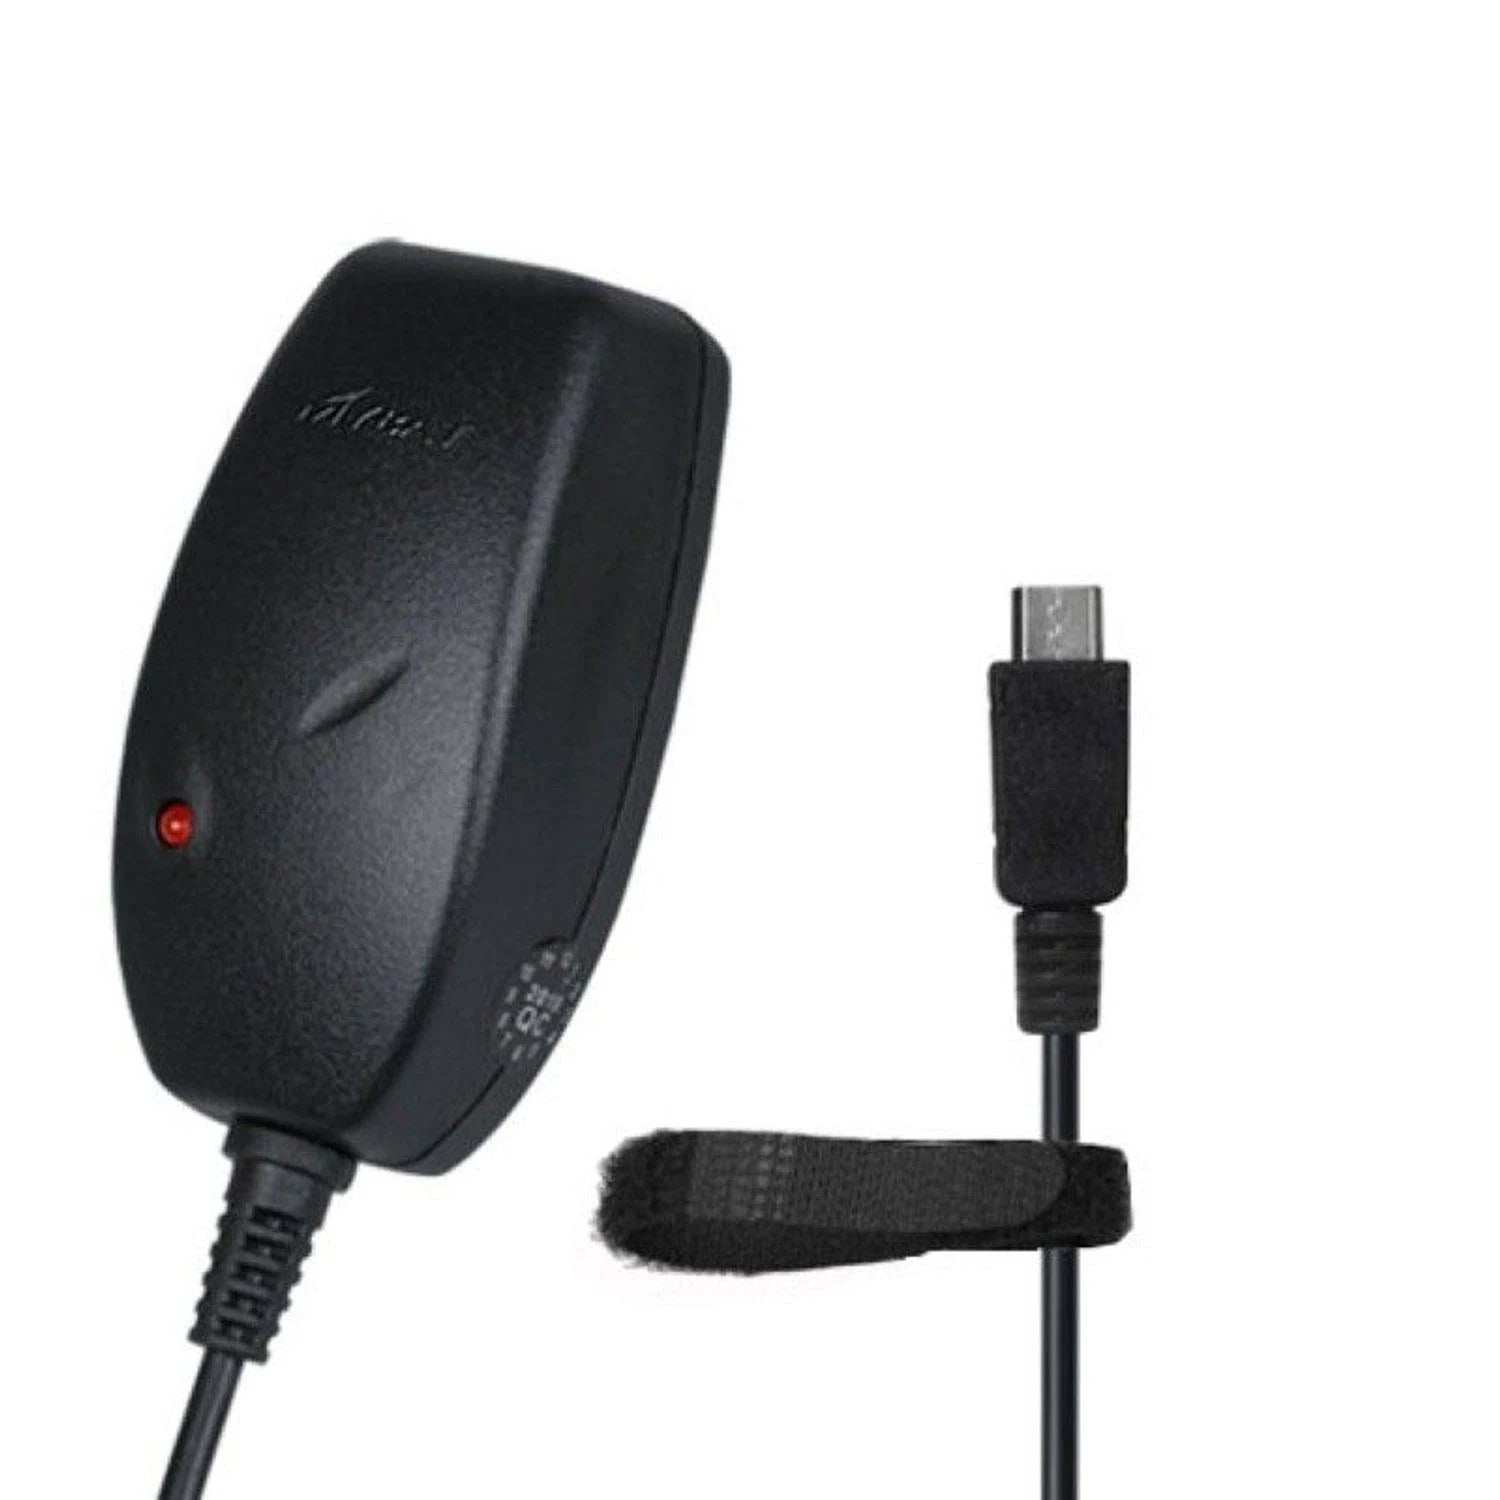 MyBat Micro USB Travel Charger With IC Chips